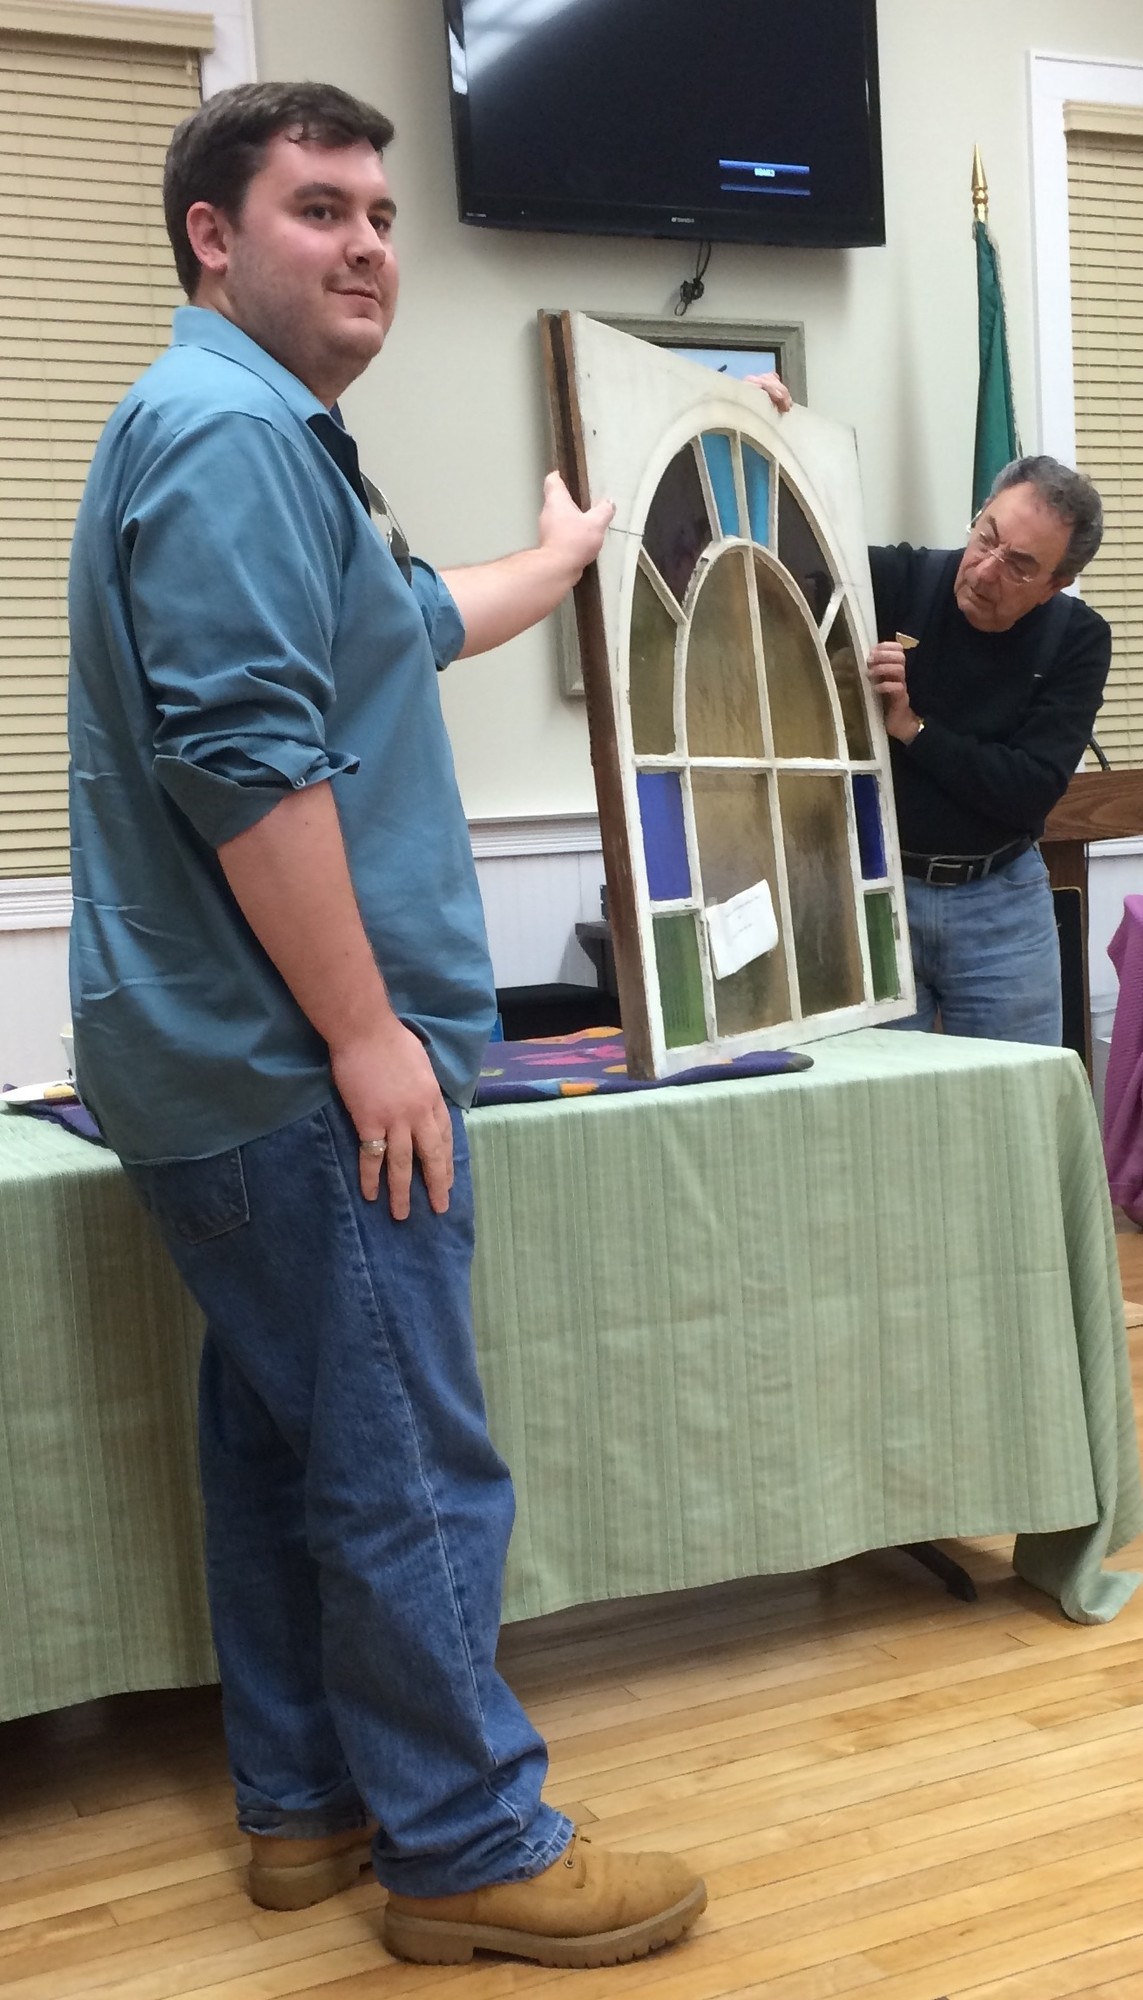 Historical Society board member Patrick Martz, left, showed Costello a stained glass window that was from the original Methodist Church building on Merrick Road.